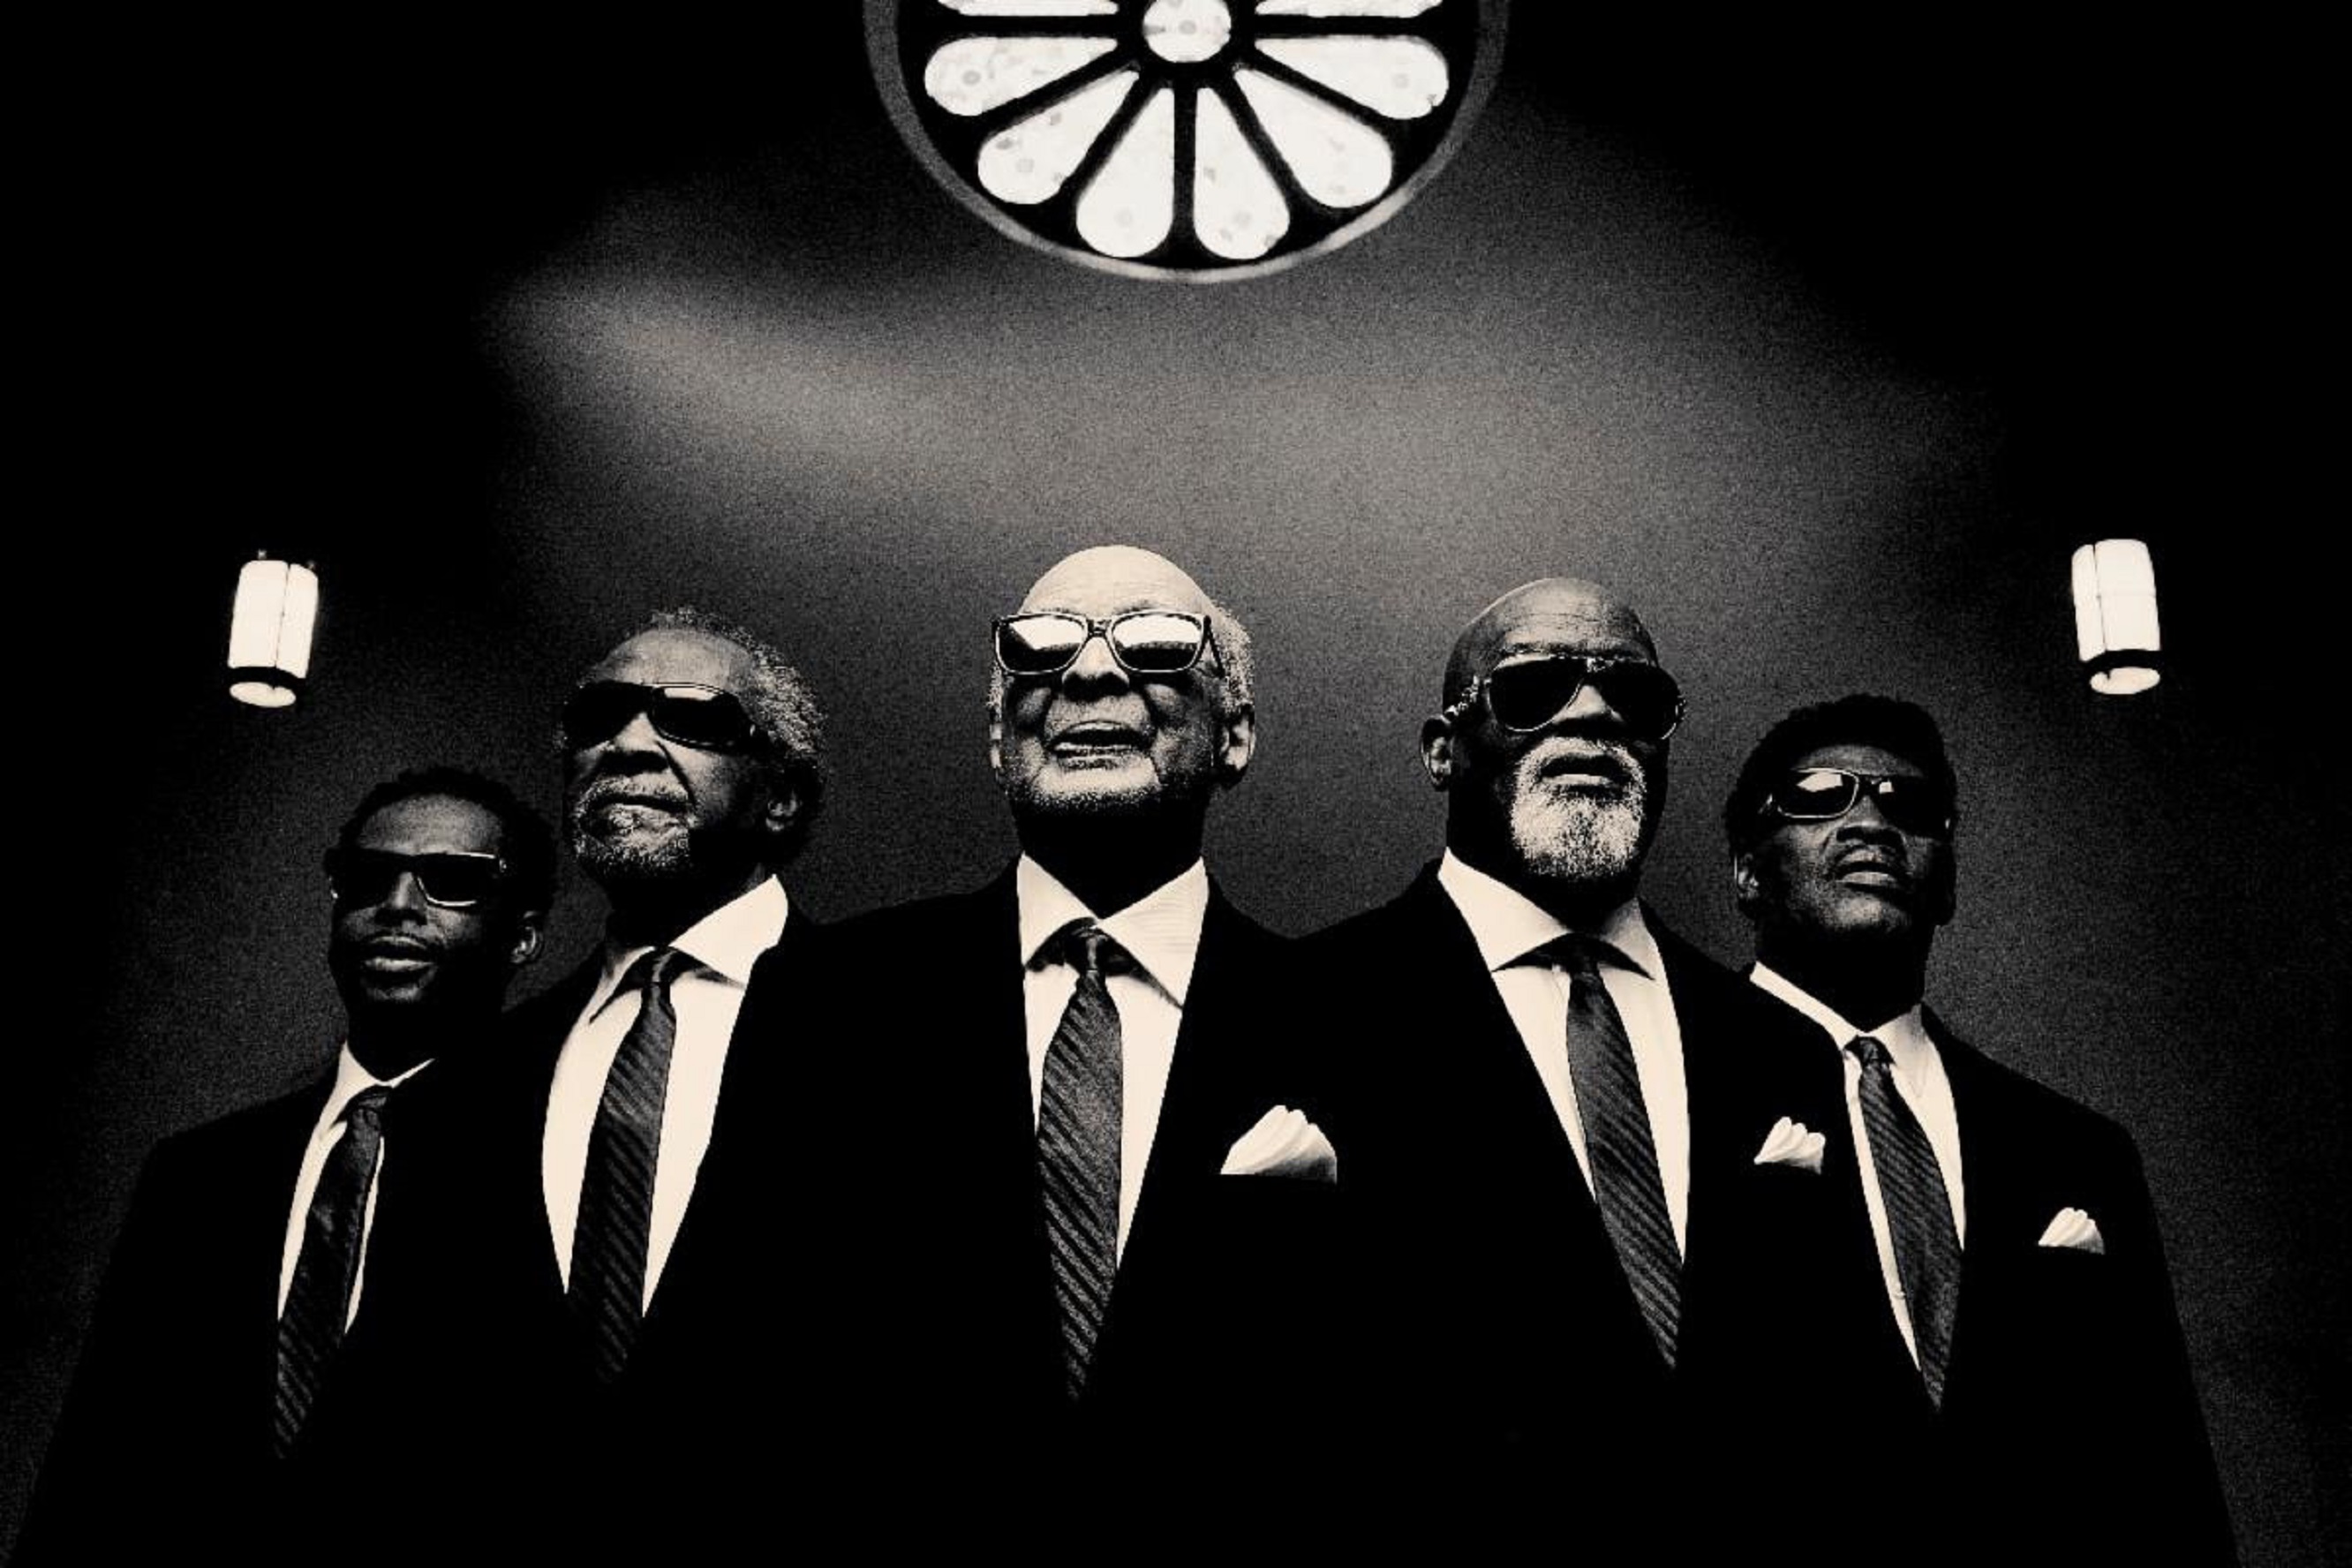 Blind Boys of Alabama + Black Violin remind us we're all in this together on cross-genre "The Message"